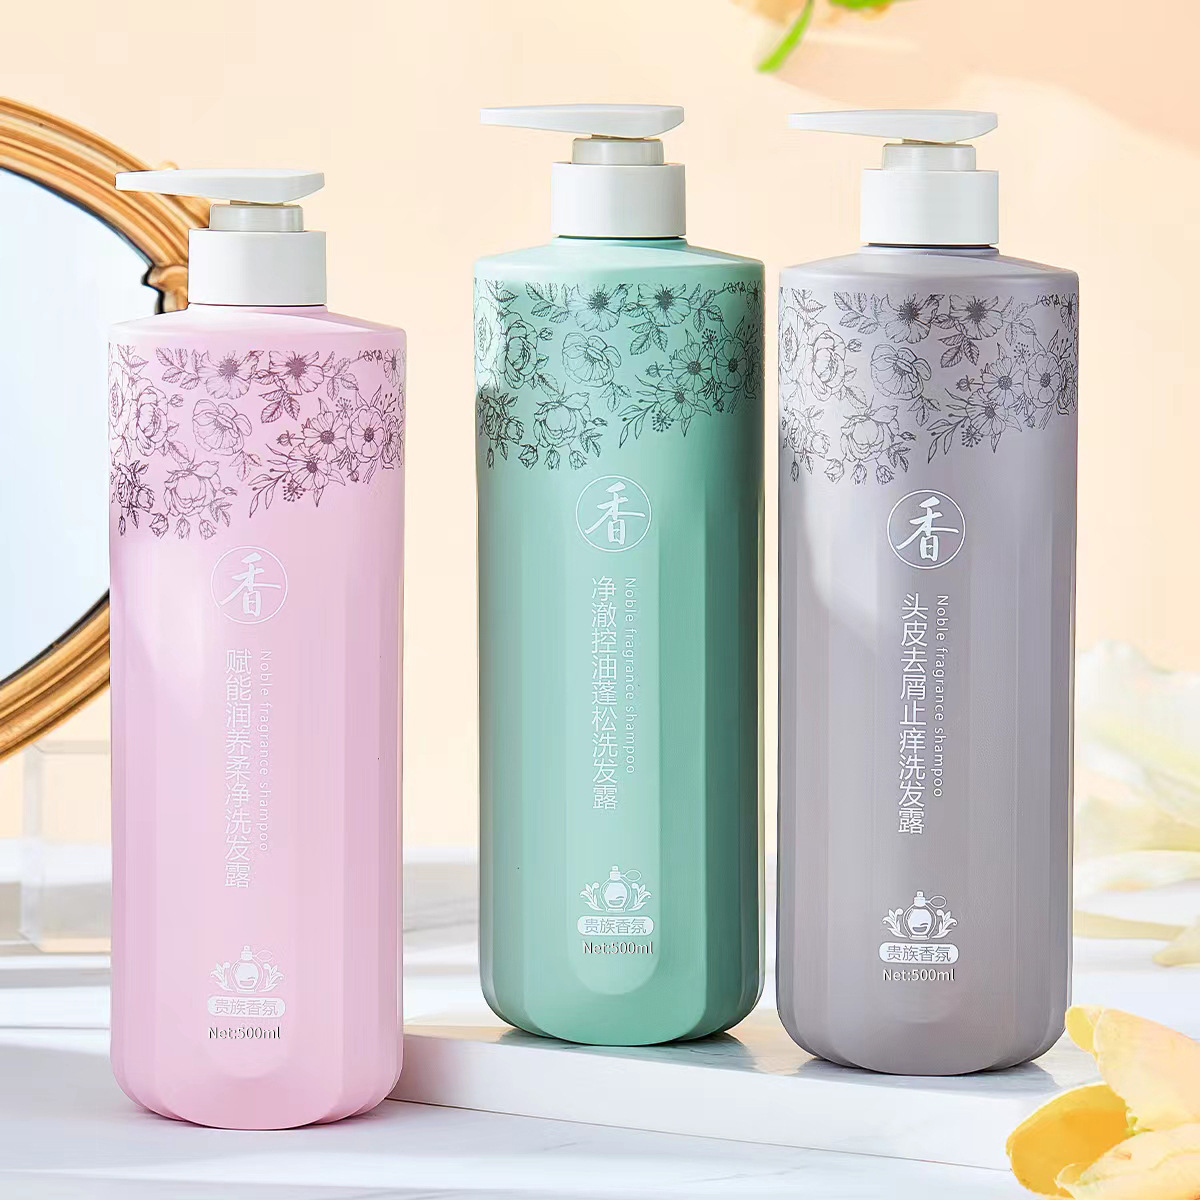 Shampoo Anti-Dandruf and Relieve Itching Oil Control Fluffy Smooth Shampoo Perfume Fragrance Shampoo Paste Hair Care Hair Mask Hair Conditioner